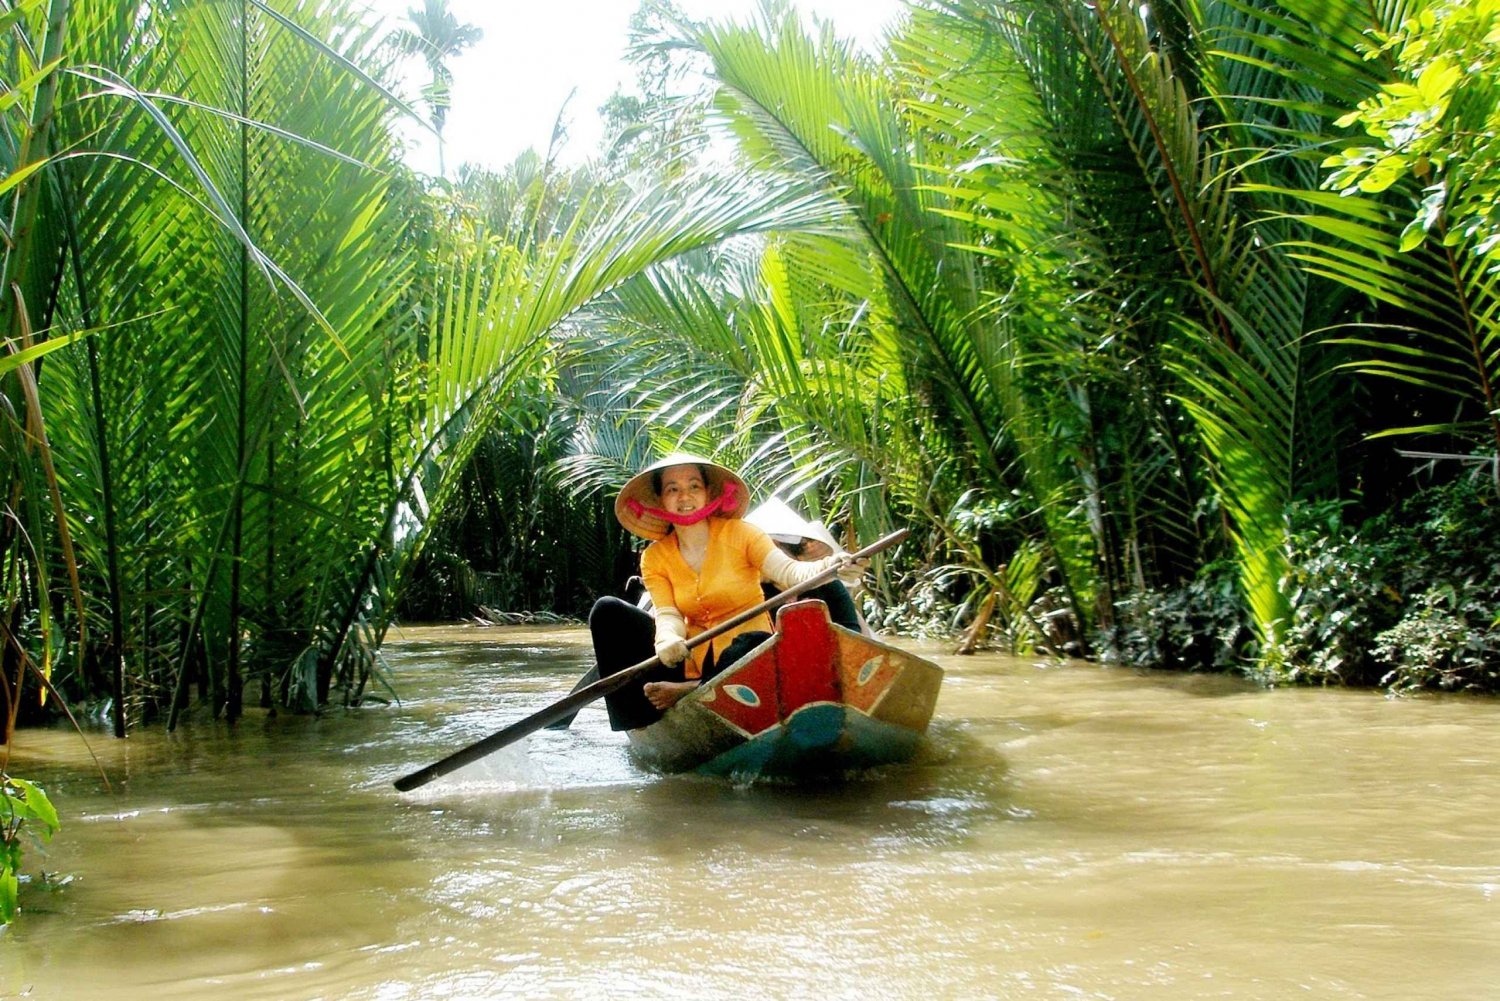 Mekong Delta: Private Tour from Ho Chi Minh